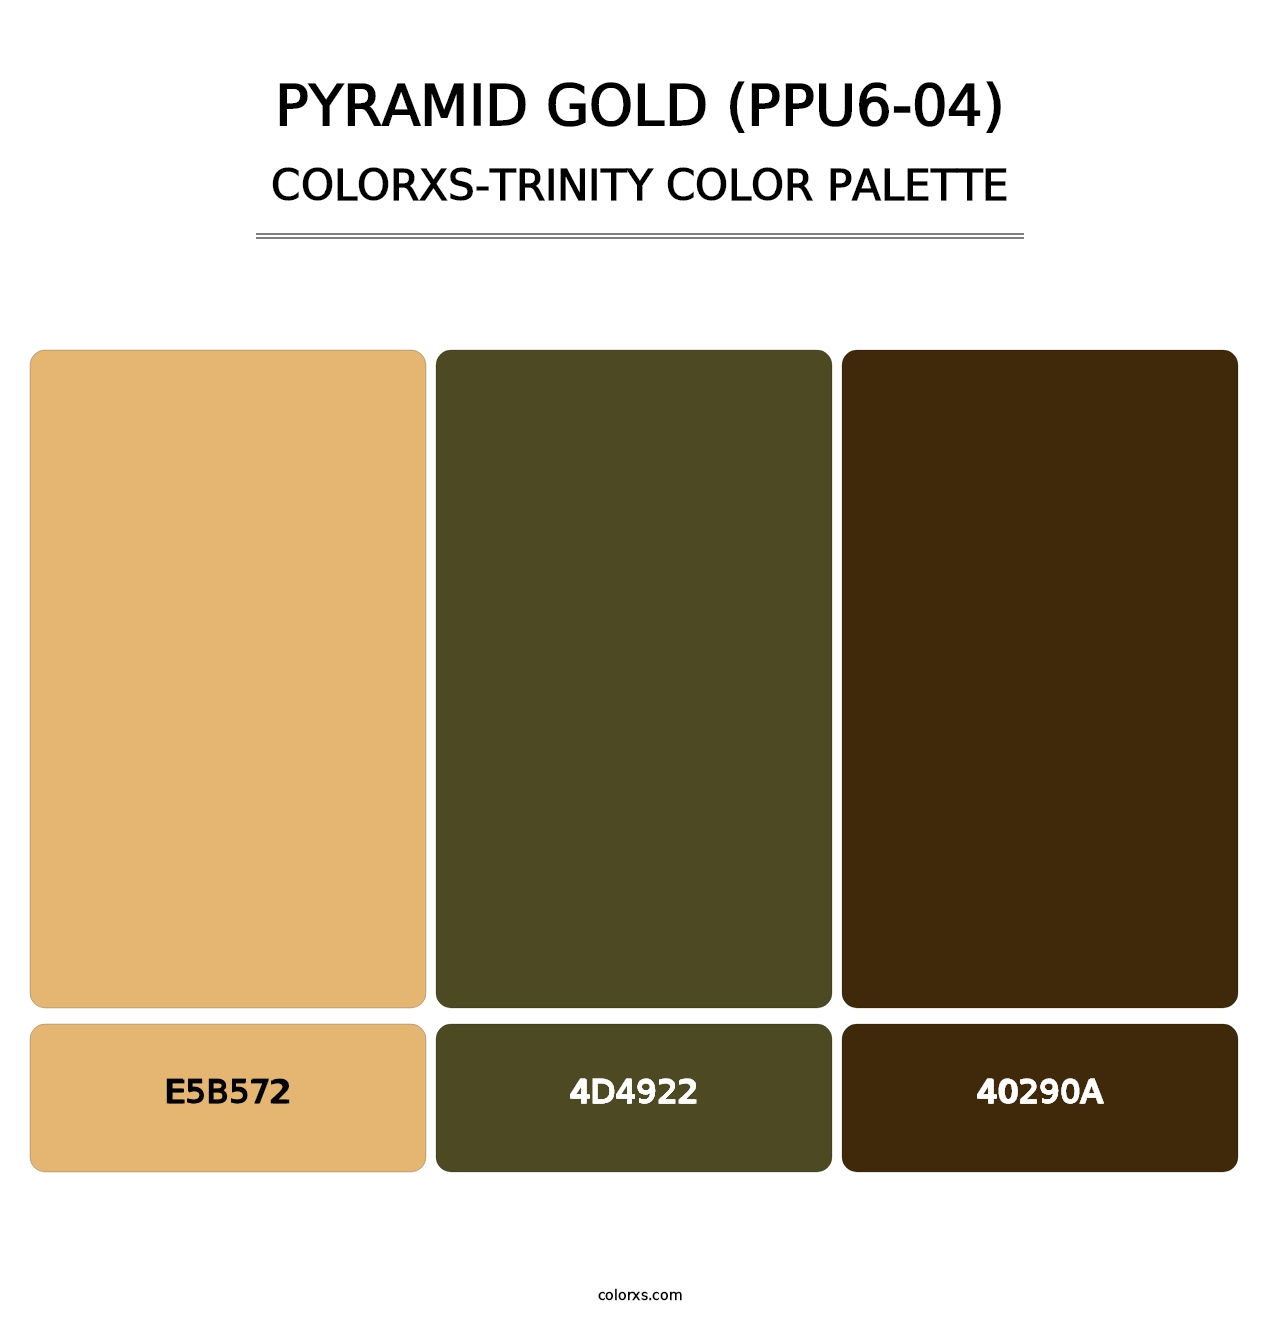 Pyramid Gold (PPU6-04) - Colorxs Trinity Palette